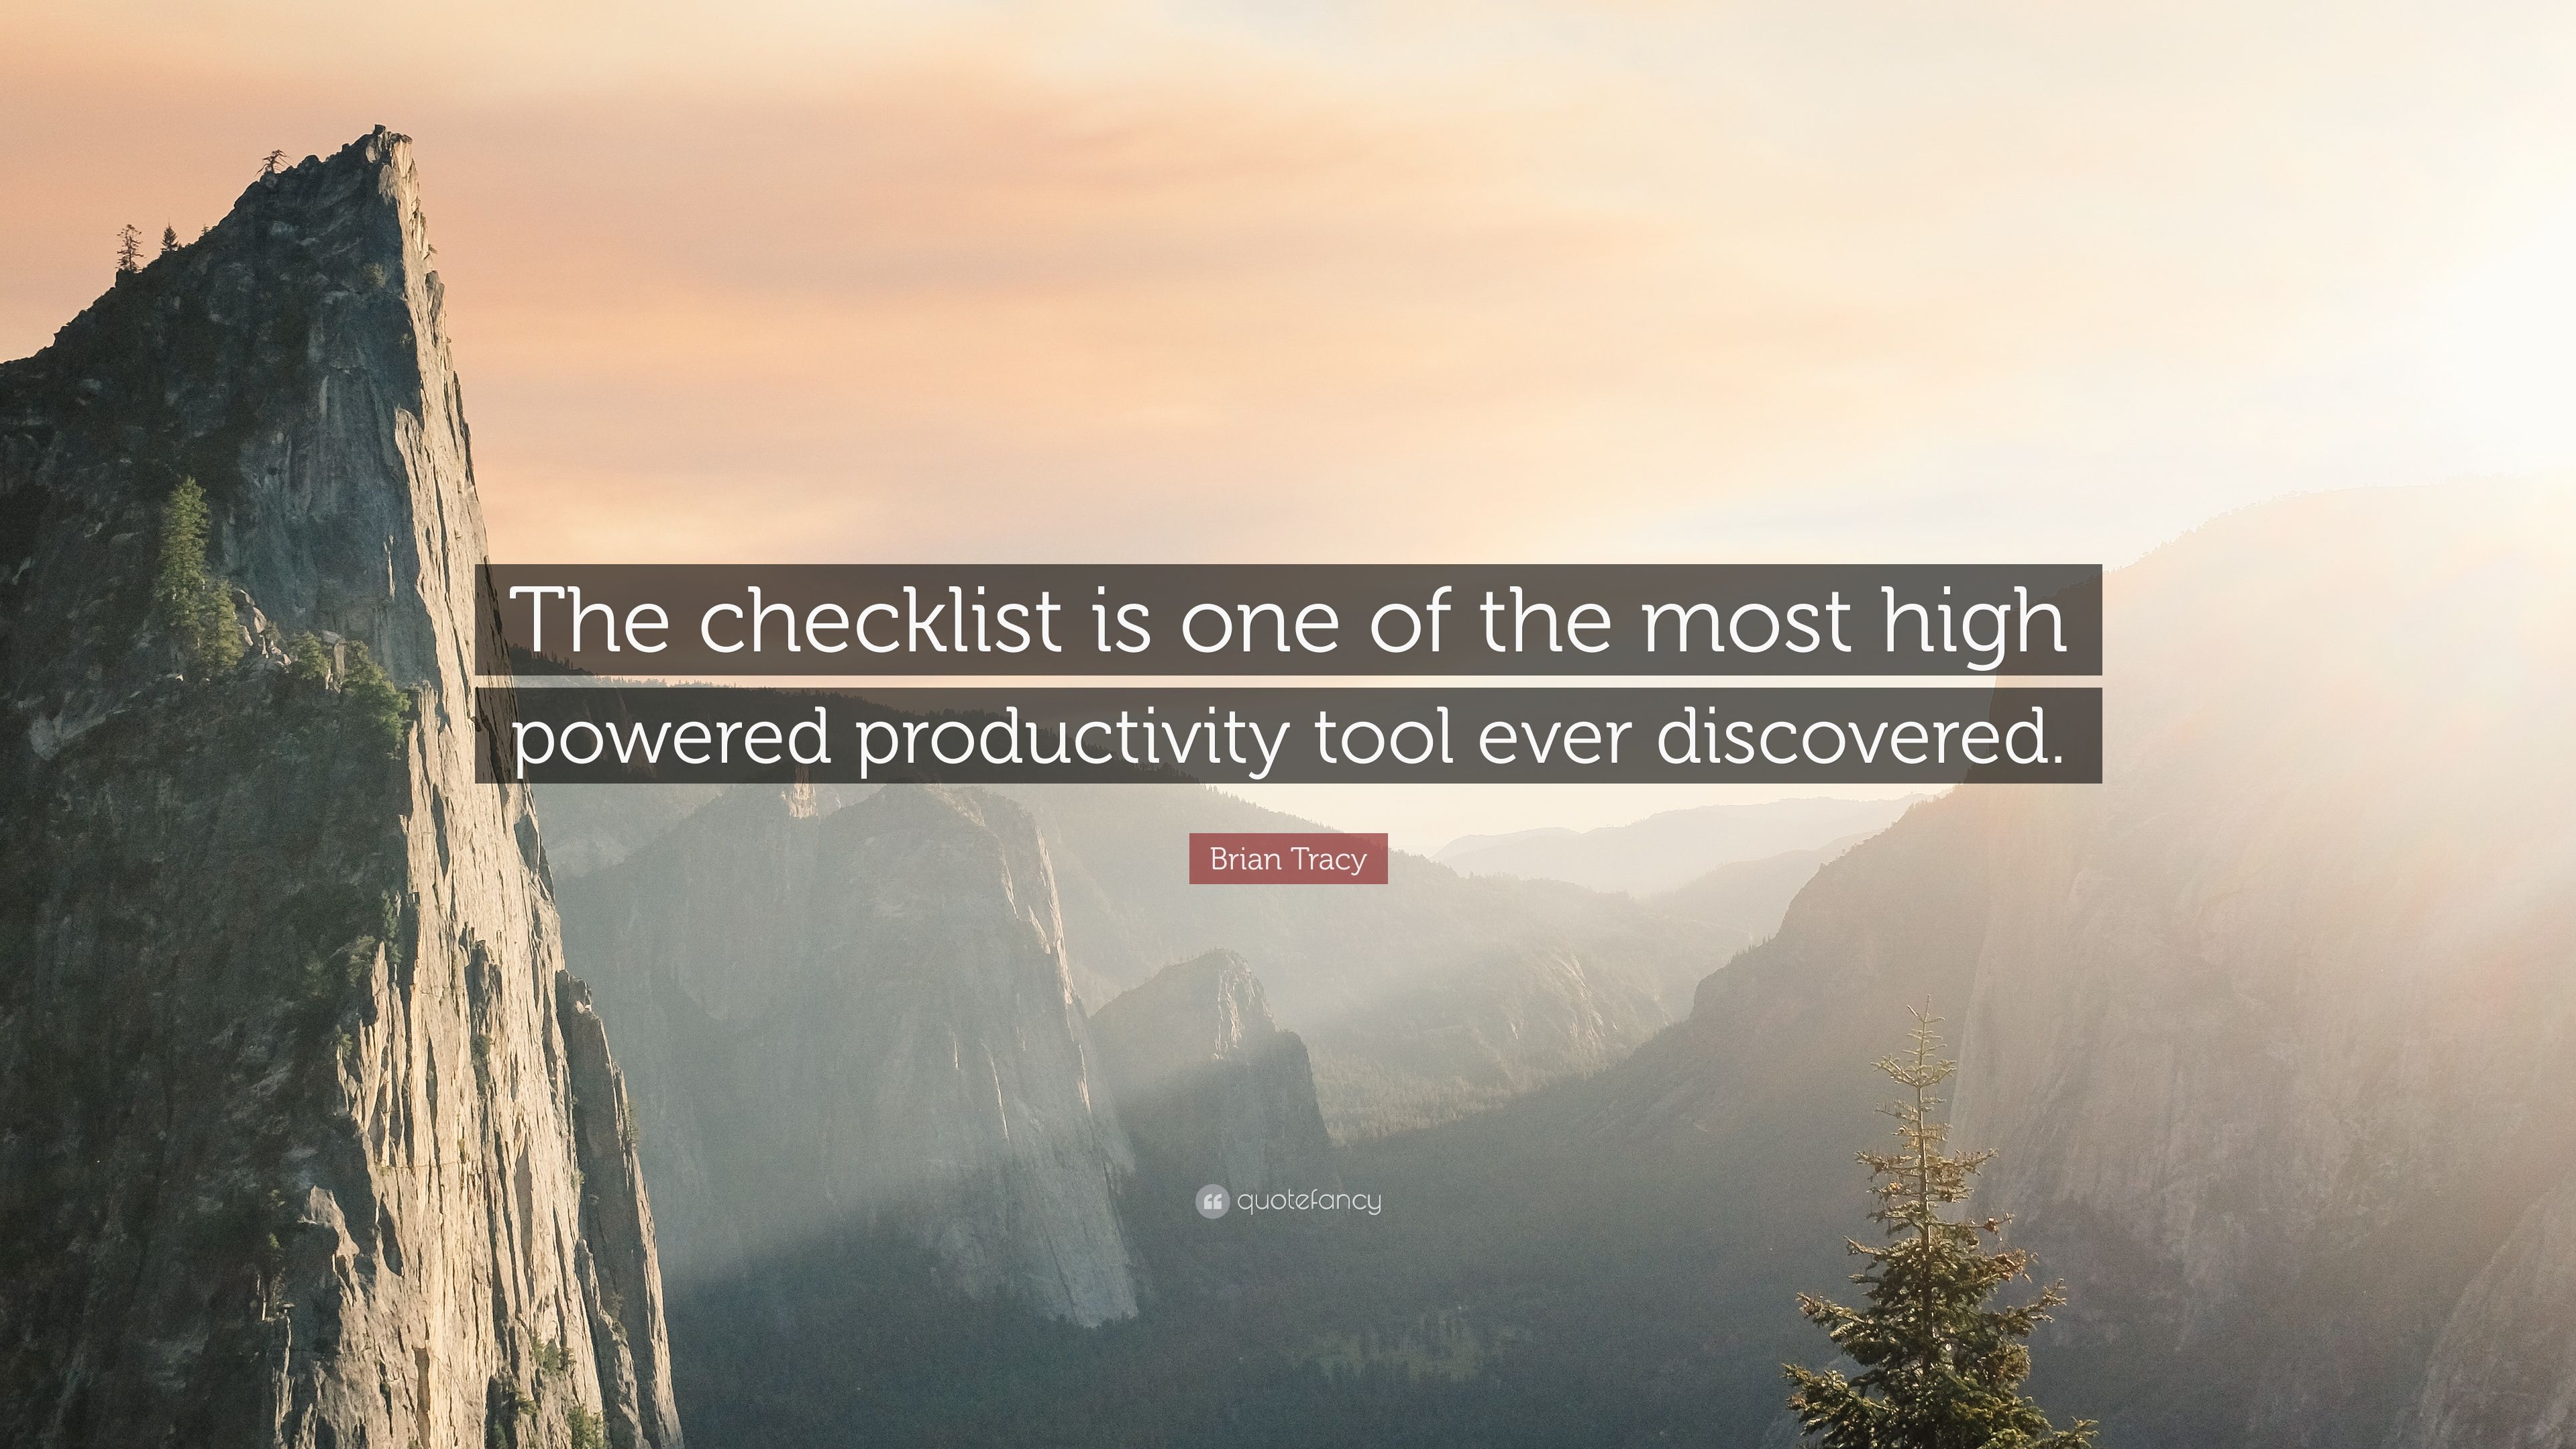 Brian Tracy Quote: “The checklist is one of the most high powered productivity tool ever discovered.” (9 wallpaper)